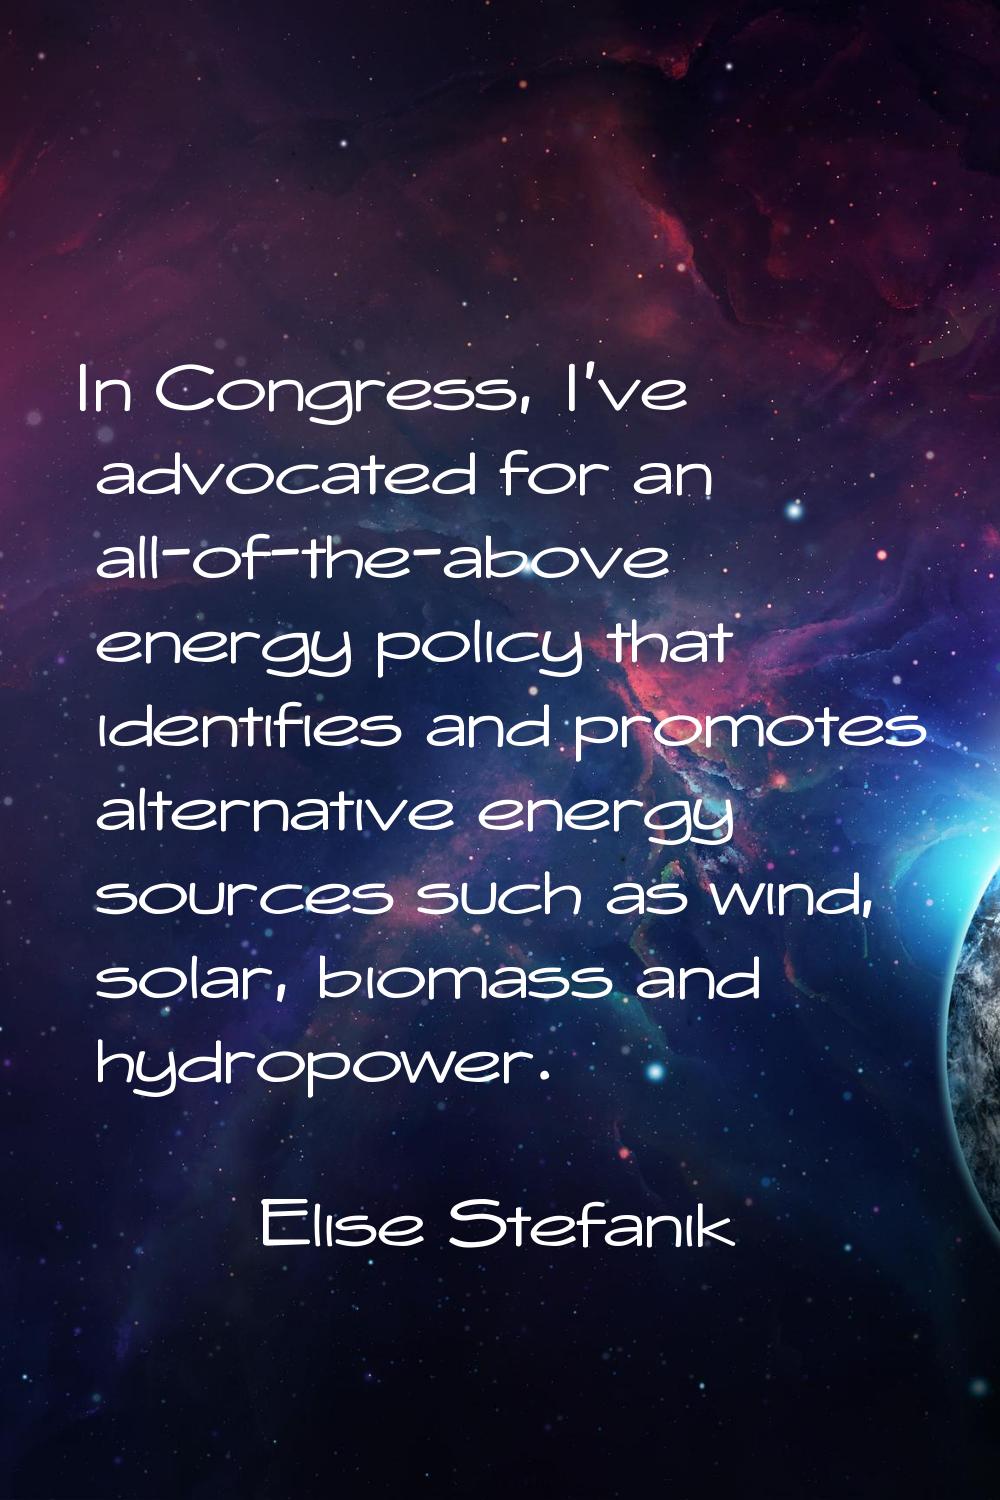 In Congress, I've advocated for an all-of-the-above energy policy that identifies and promotes alte